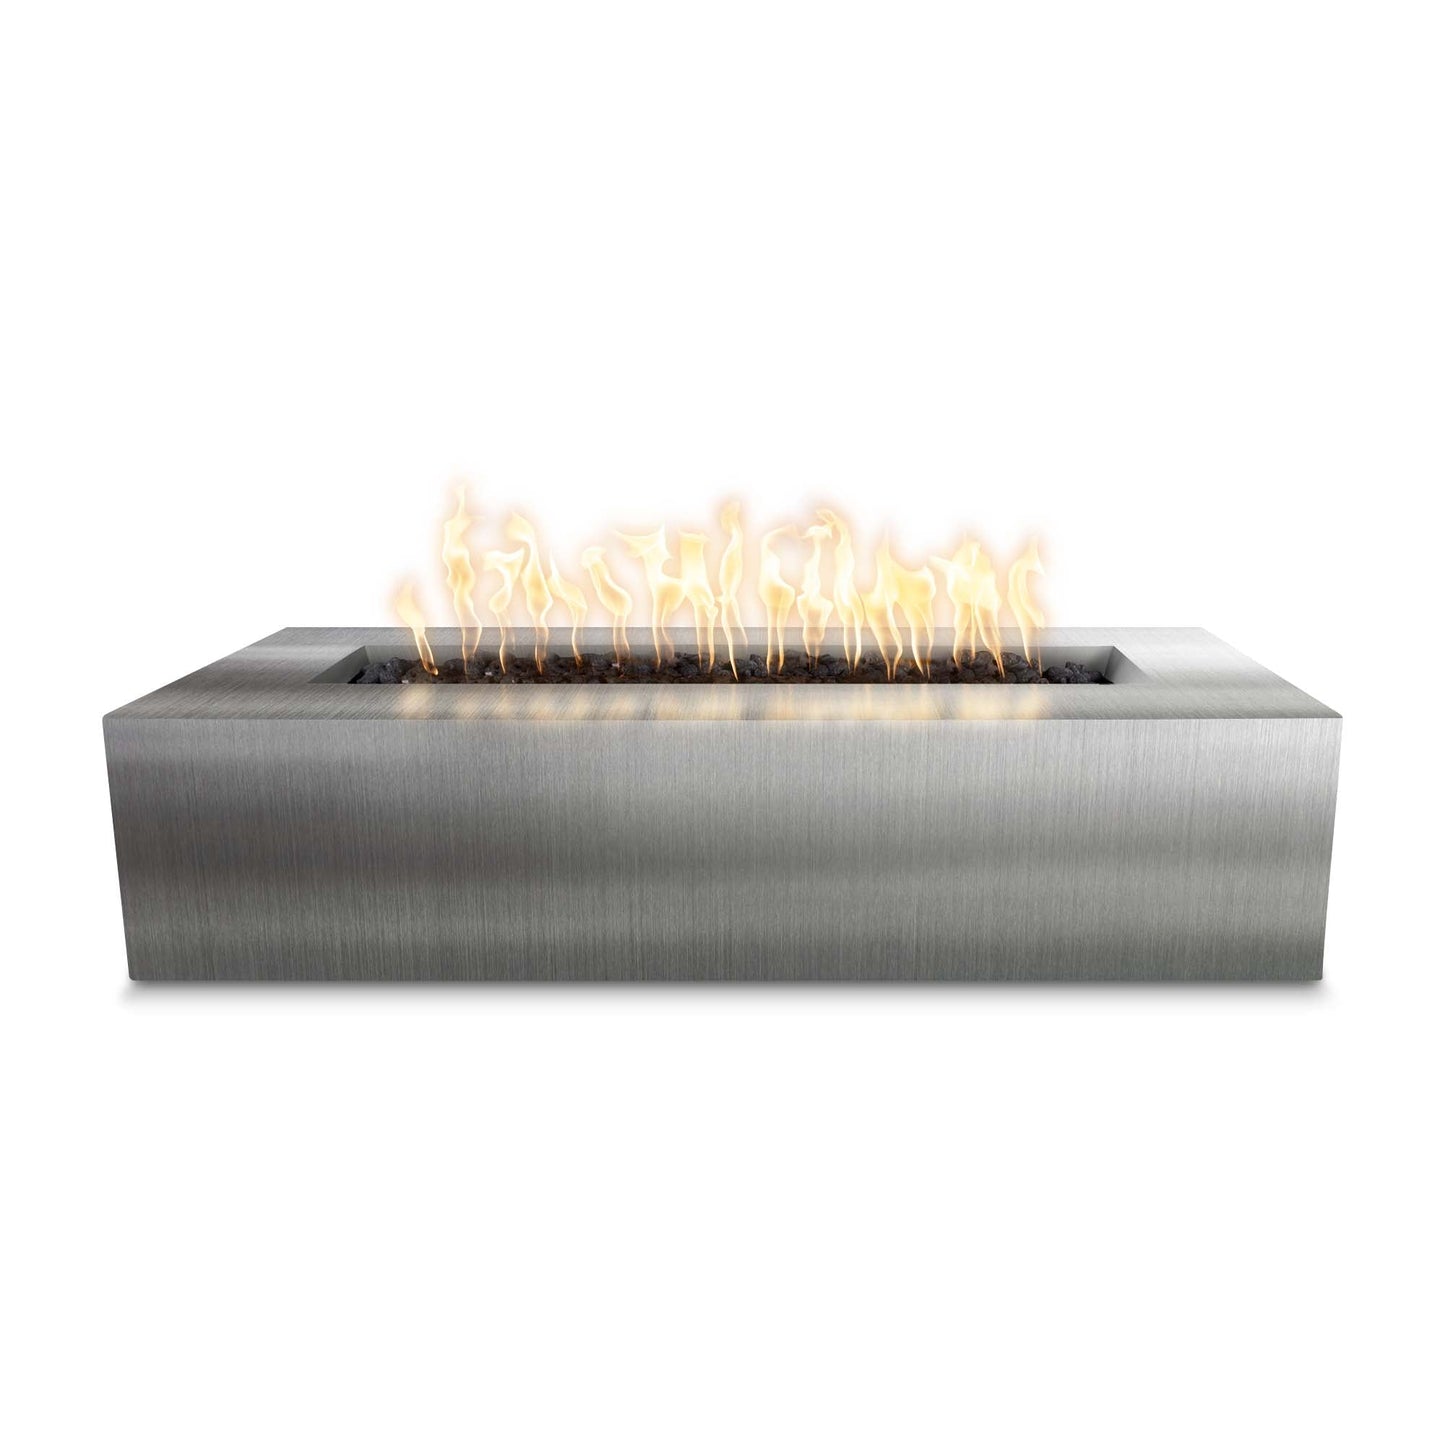 The Outdoor Plus Rectangular Regal 60" Corten Steel Natural Gas Fire Pit with Match Lit Ignition